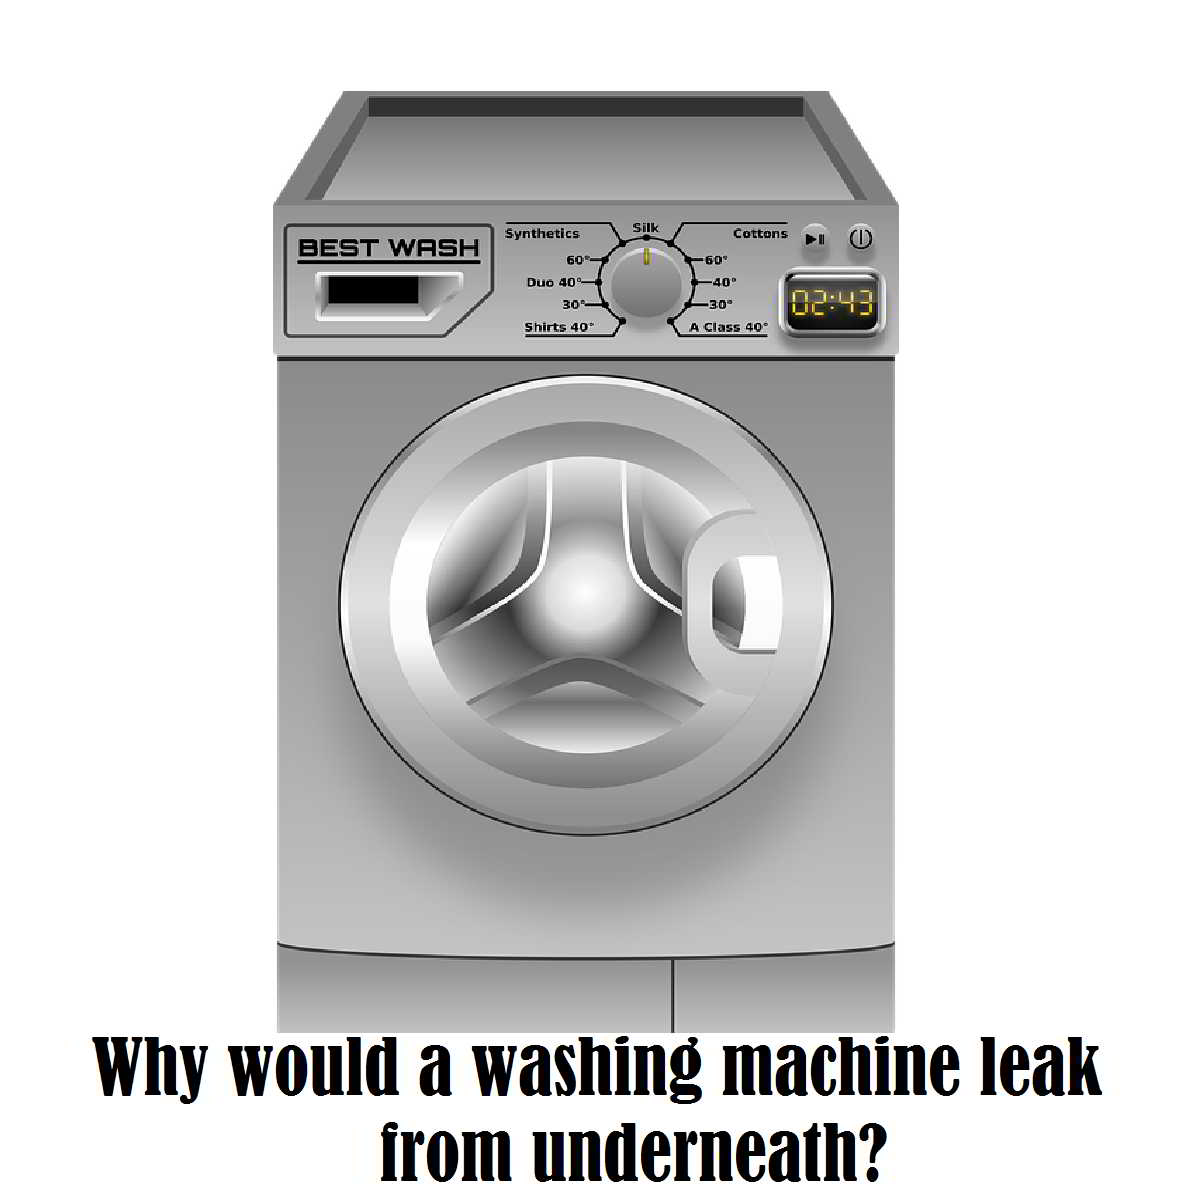 Why would a washing machine leak from underneath